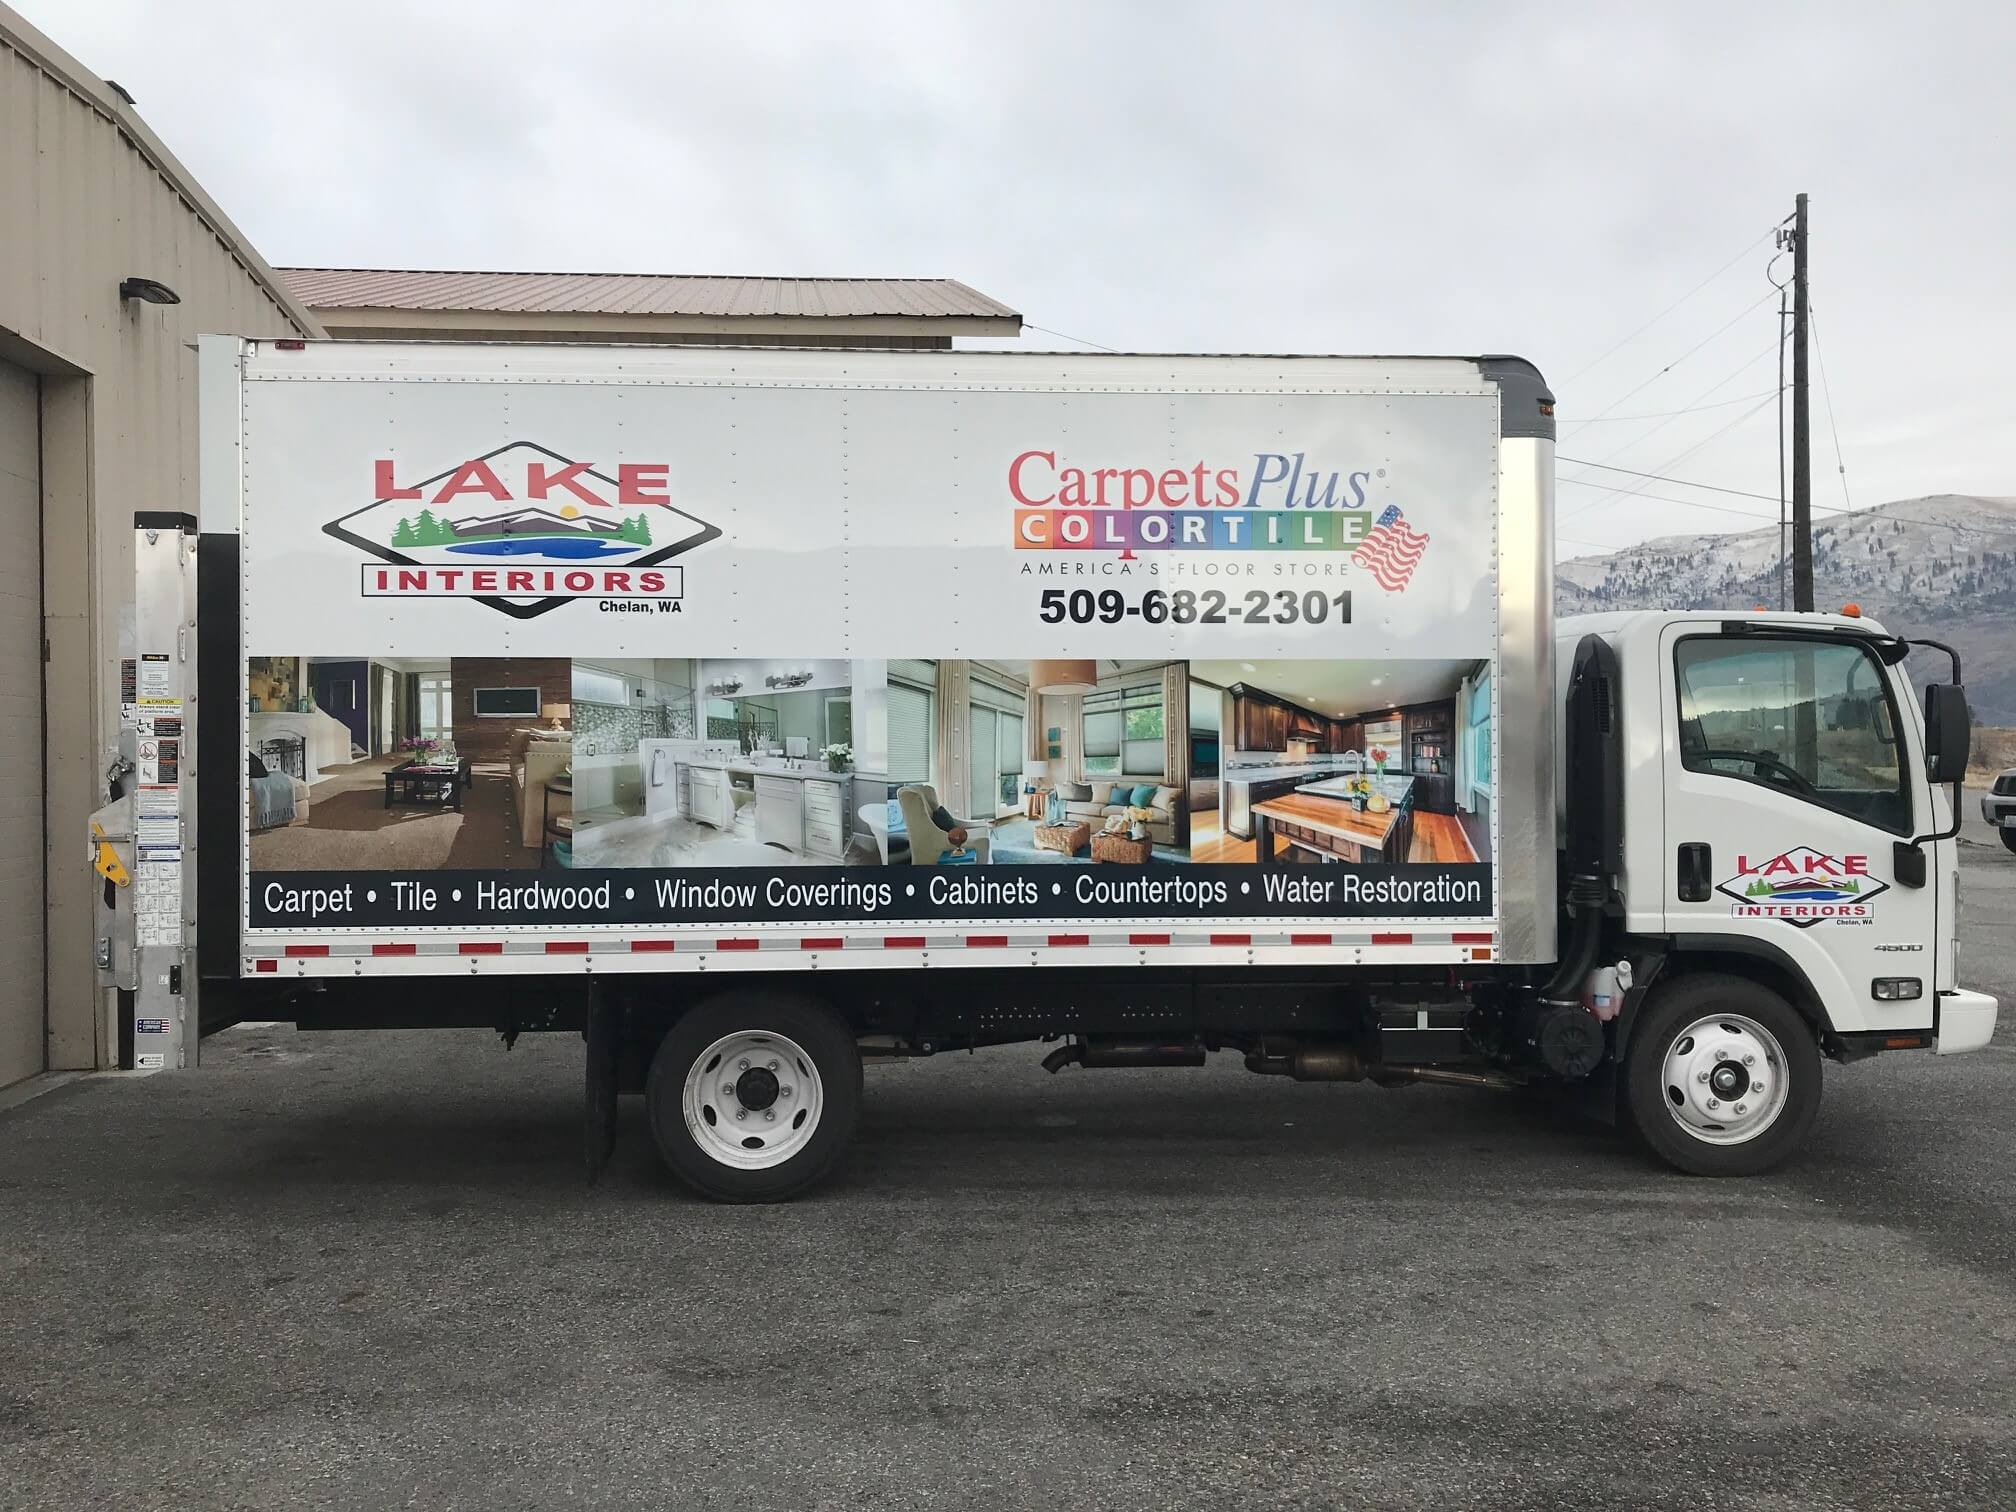 Lake-Interiors-Chelan-Delivery-Truck